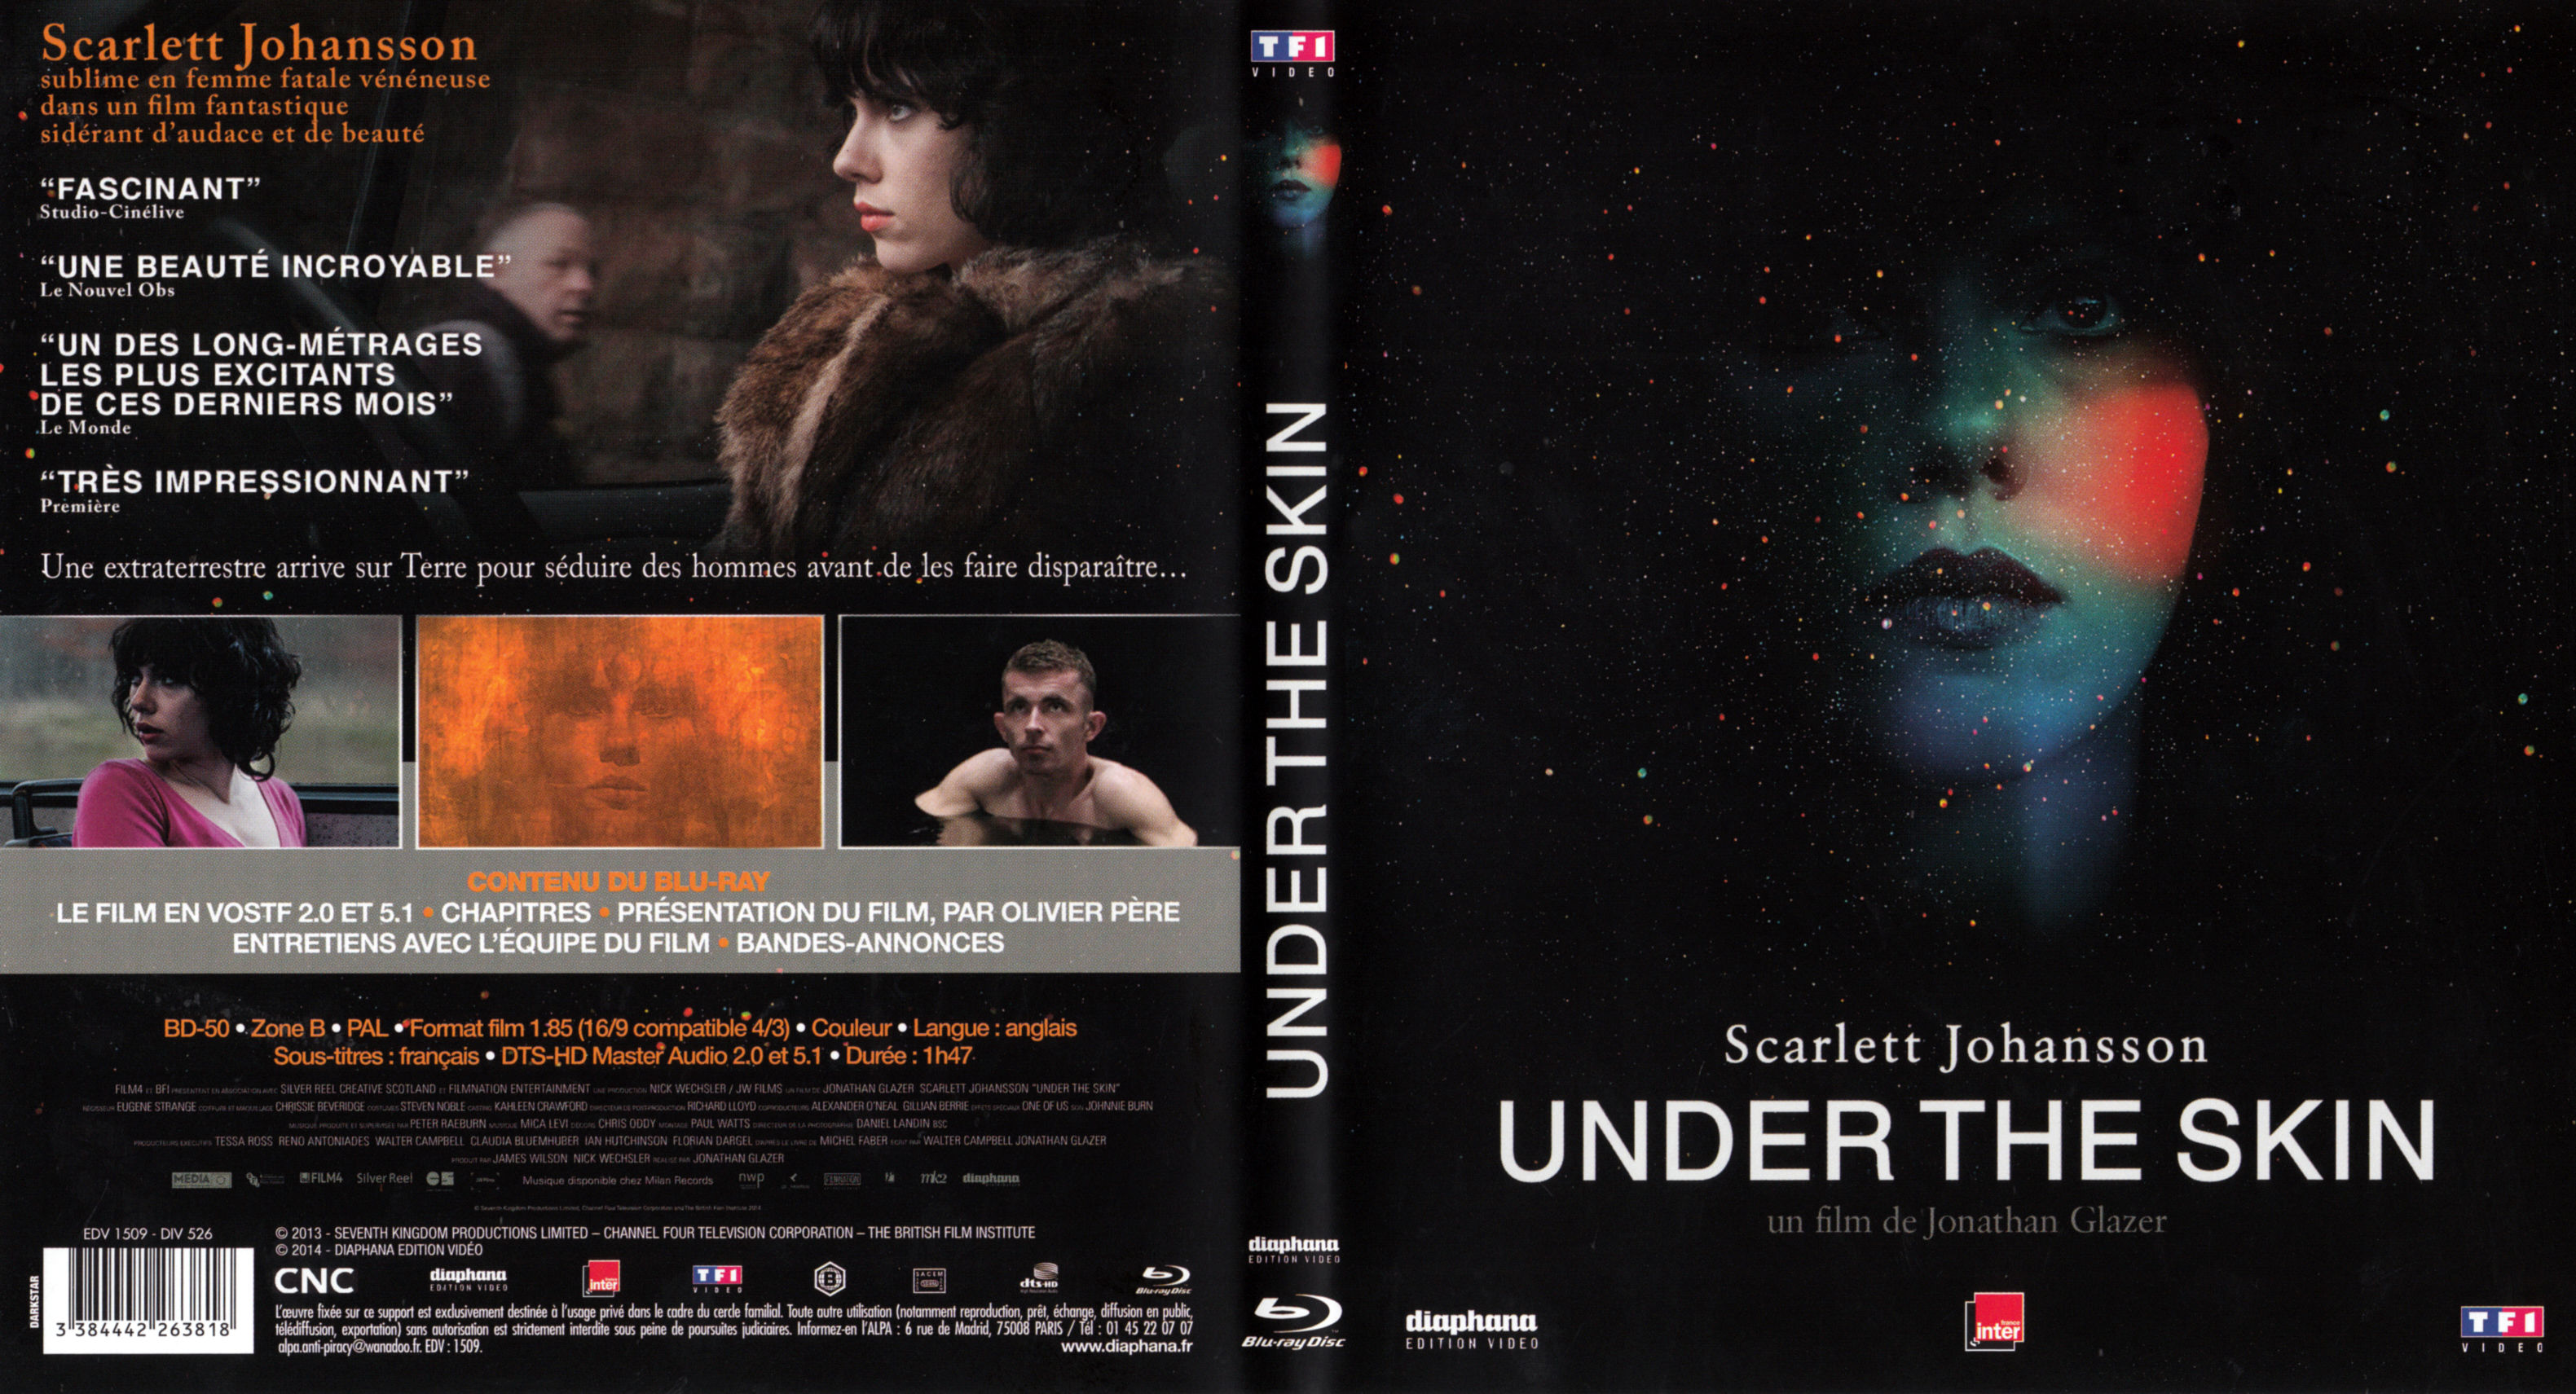 Jaquette DVD Under the Skin (BLU-RAY)